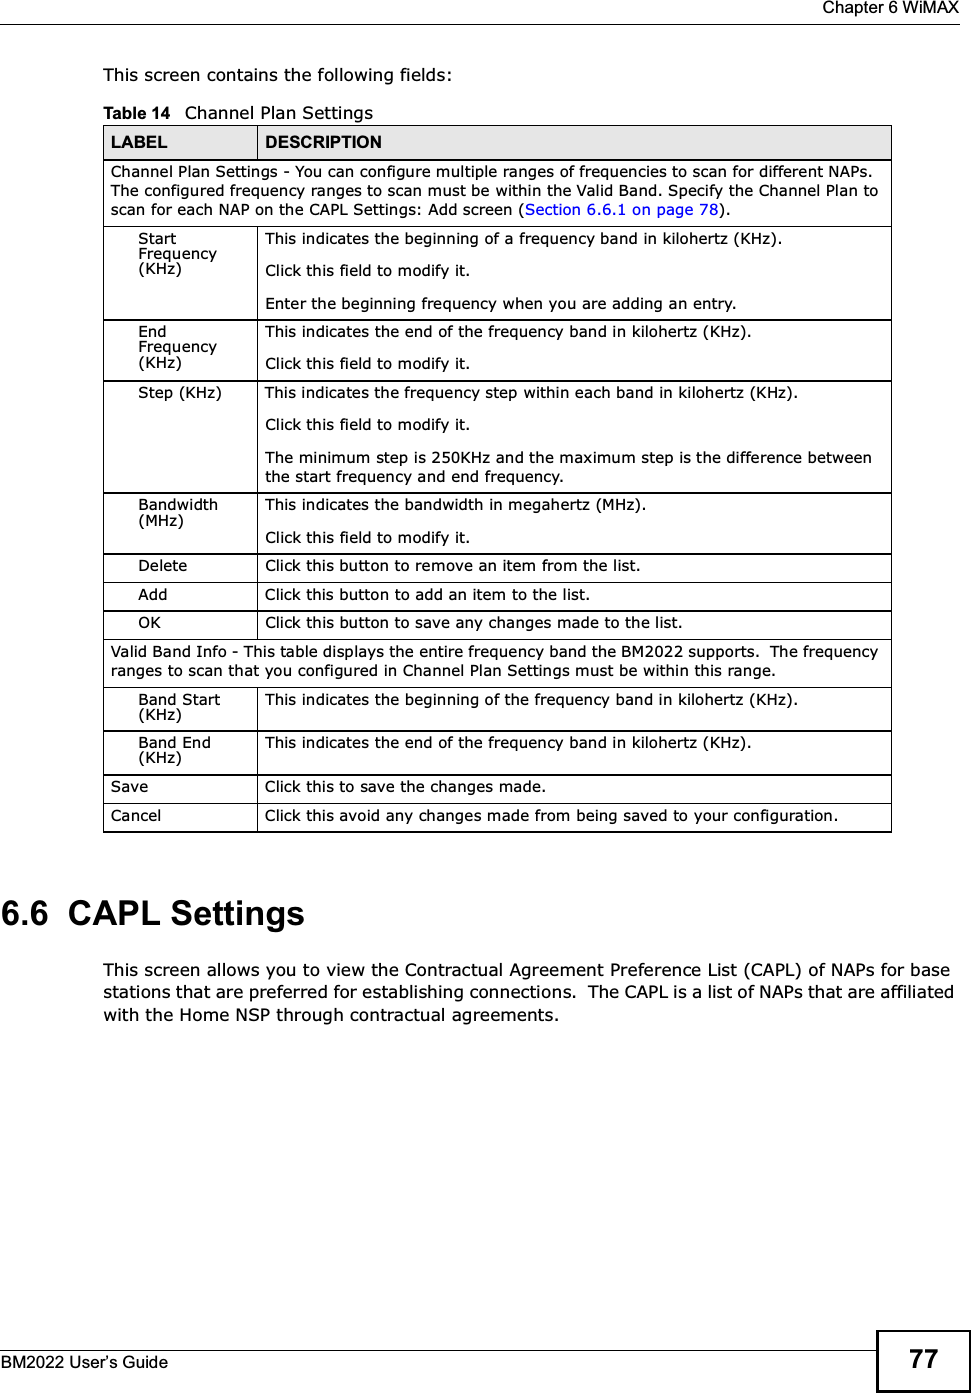  Chapter 6 WiMAXBM2022 Users Guide 77This screen contains the following fields:6.6  CAPL SettingsThis screen allows you to view the Contractual Agreement Preference List (CAPL) of NAPs for base stations that are preferred for establishing connections.  The CAPL is a list of NAPs that are affiliated with the Home NSP through contractual agreements.Table 14   Channel Plan SettingsLABEL DESCRIPTIONChannel Plan Settings - You can configure multiple ranges of frequencies to scan for different NAPs.  The configured frequency ranges to scan must be within the Valid Band. Specify the Channel Plan to scan for each NAP on the CAPL Settings: Add screen (Section 6.6.1 on page 78).Start Frequency (KHz)This indicates the beginning of a frequency band in kilohertz (KHz).Click this field to modify it.Enter the beginning frequency when you are adding an entry.End Frequency (KHz)This indicates the end of the frequency band in kilohertz (KHz).Click this field to modify it.Step (KHz) This indicates the frequency step within each band in kilohertz (KHz).Click this field to modify it.The minimum step is 250KHz and the maximum step is the difference between the start frequency and end frequency.Bandwidth (MHz)This indicates the bandwidth in megahertz (MHz).Click this field to modify it.Delete Click this button to remove an item from the list.Add Click this button to add an item to the list.OK Click this button to save any changes made to the list.Valid Band Info - This table displays the entire frequency band the BM2022 supports.  The frequency ranges to scan that you configured in Channel Plan Settings must be within this range.Band Start (KHz)This indicates the beginning of the frequency band in kilohertz (KHz).Band End (KHz)This indicates the end of the frequency band in kilohertz (KHz).Save Click this to save the changes made.Cancel Click this avoid any changes made from being saved to your configuration.